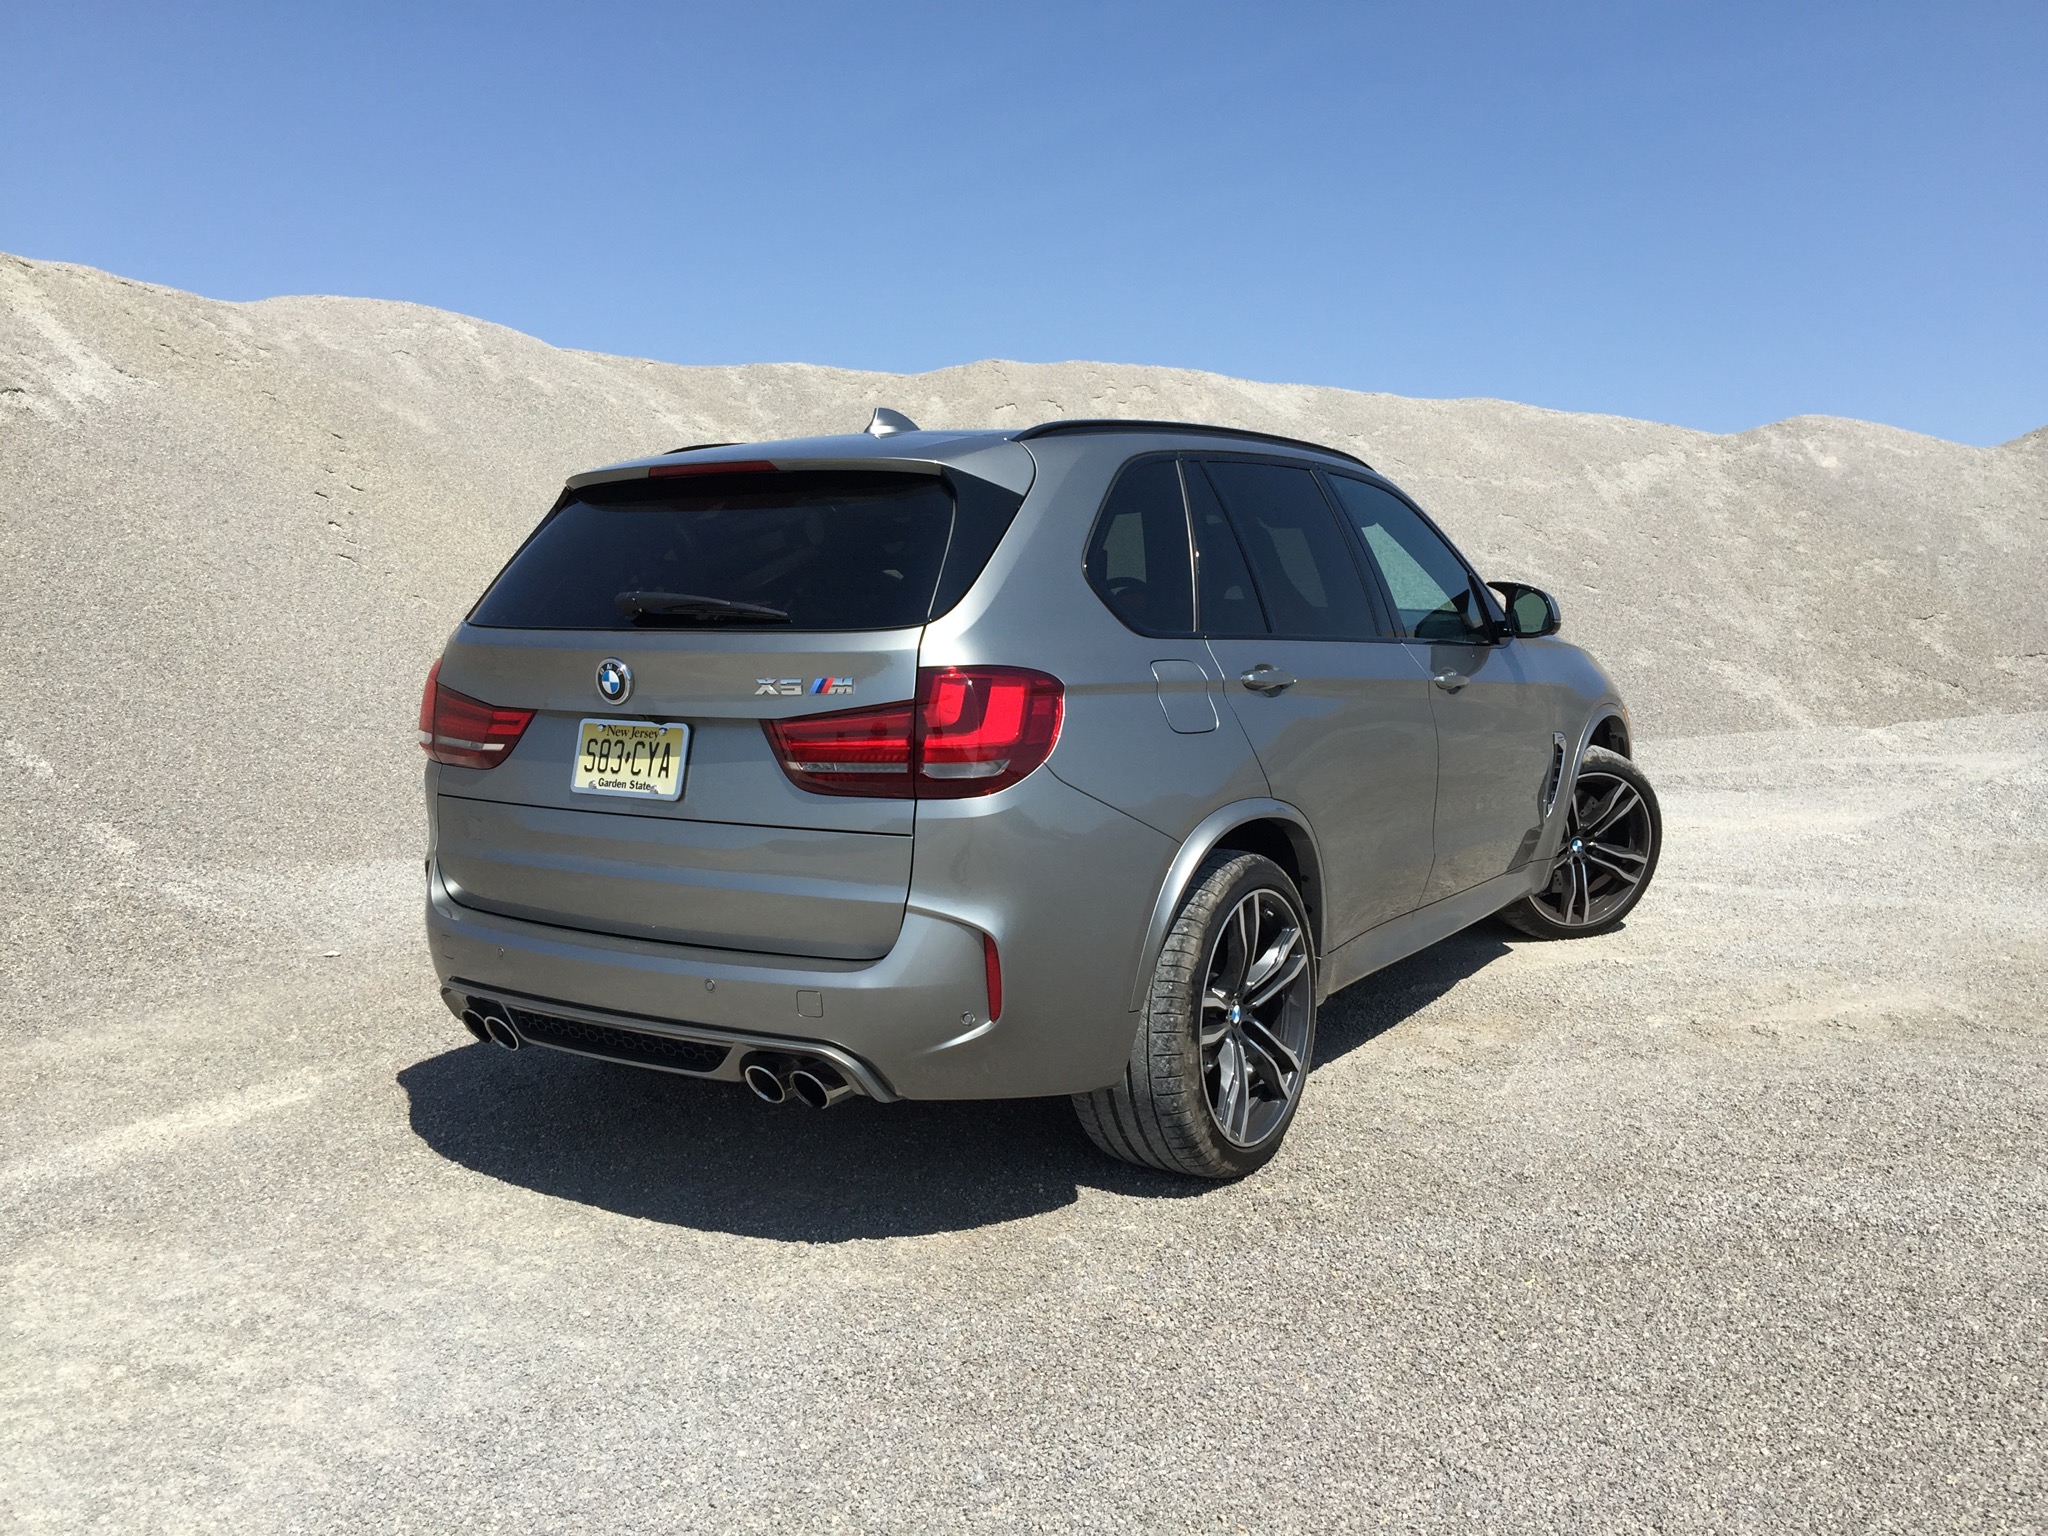 2016 BMW X5 M Review | CarAdvice